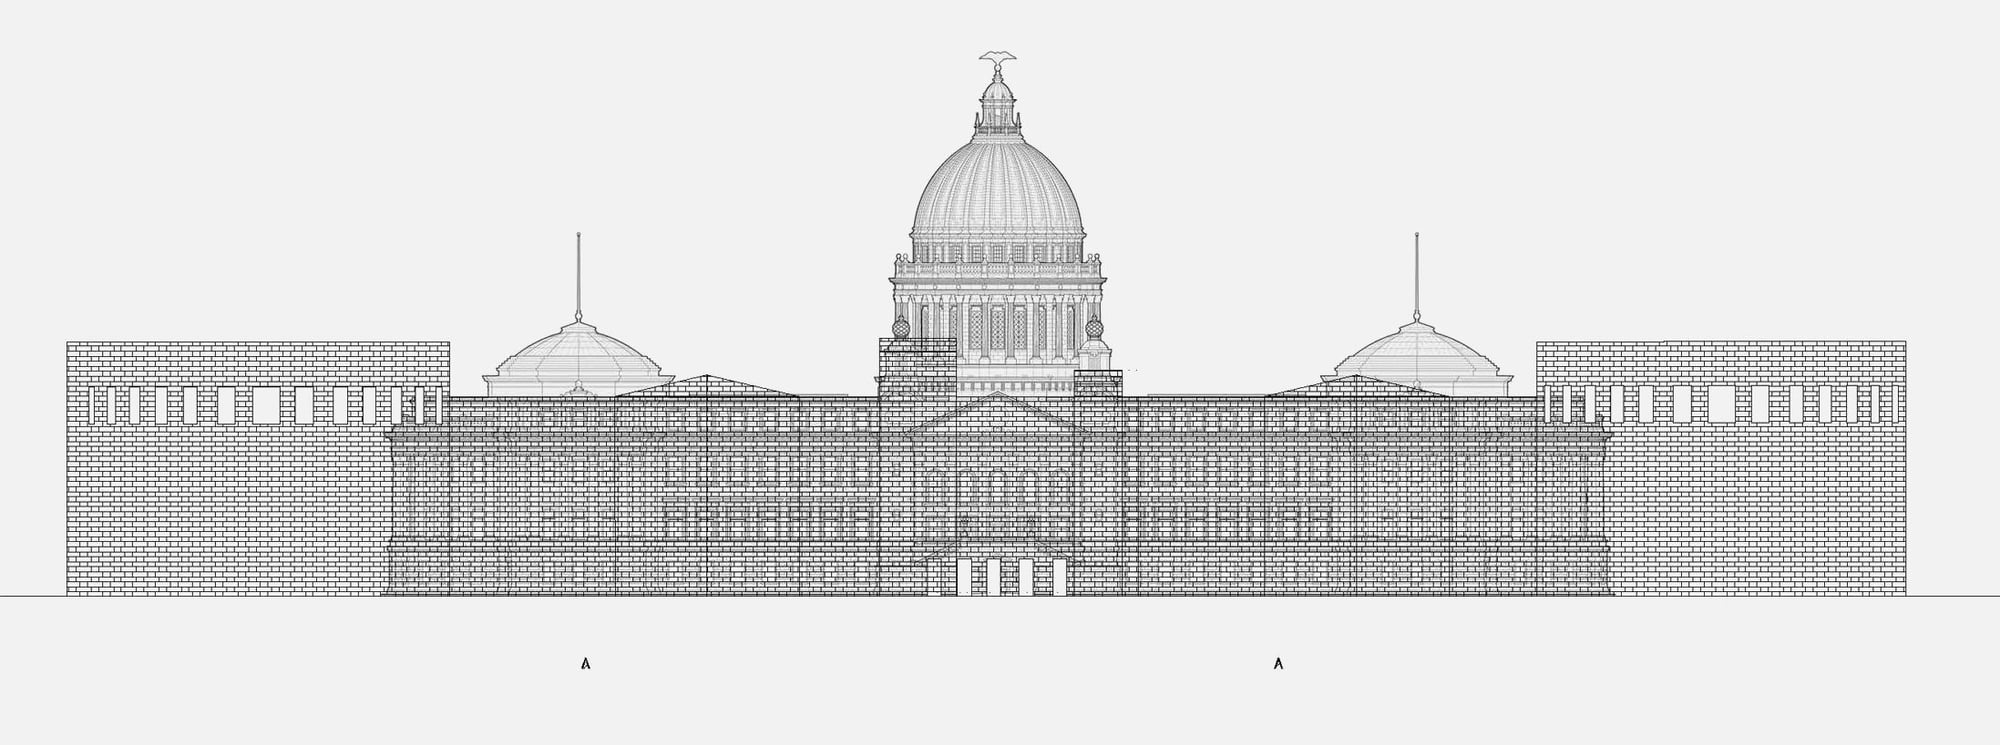 Opposite Office Proposes Protecting the US Capitol with a Decorative Brick Wall